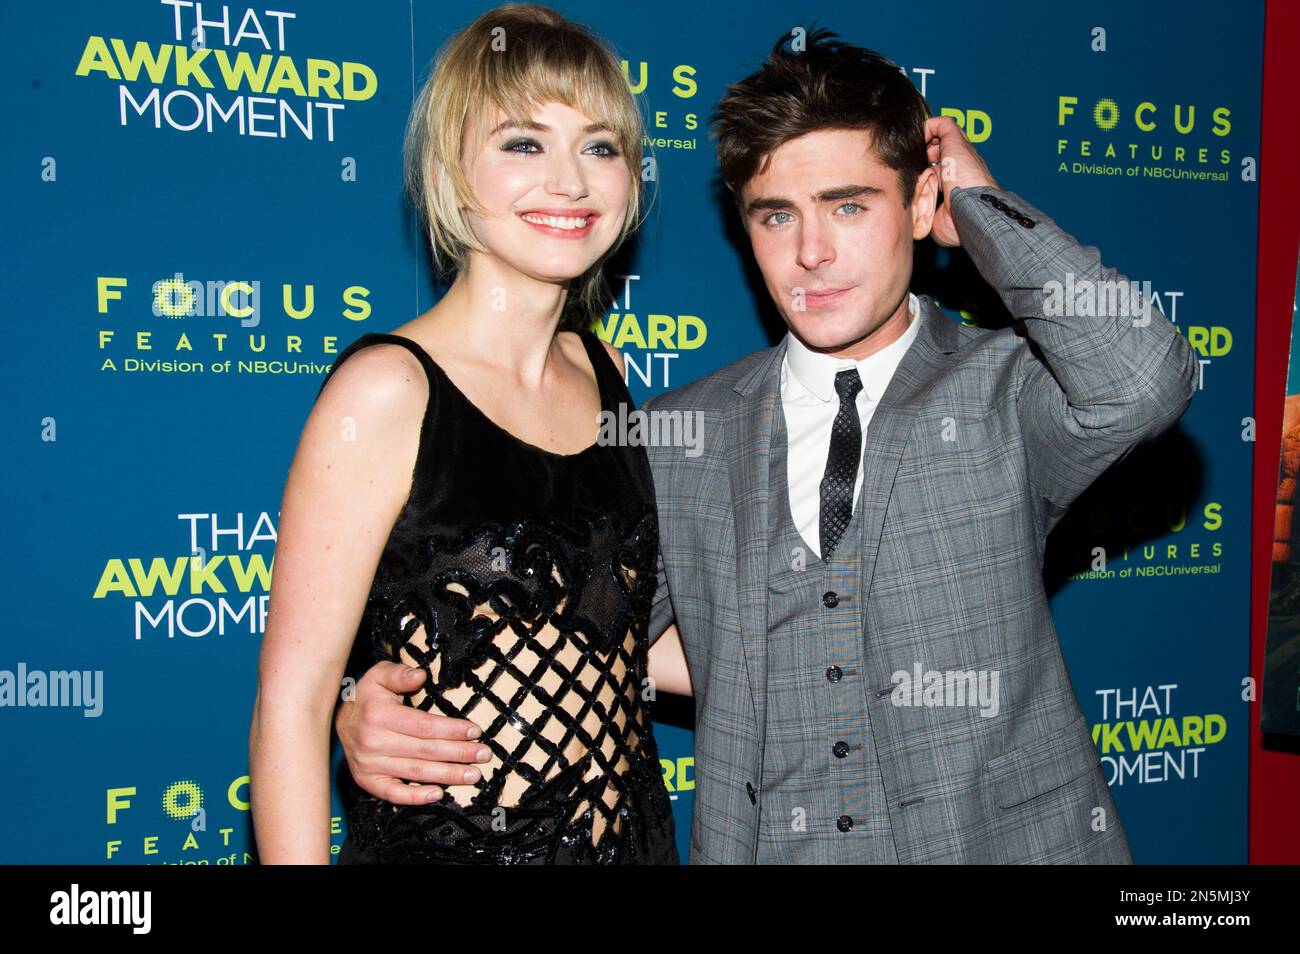 Imogen Poots And Zac Efron Attend The That Awkward Moment Premiere On Wednesday Jan